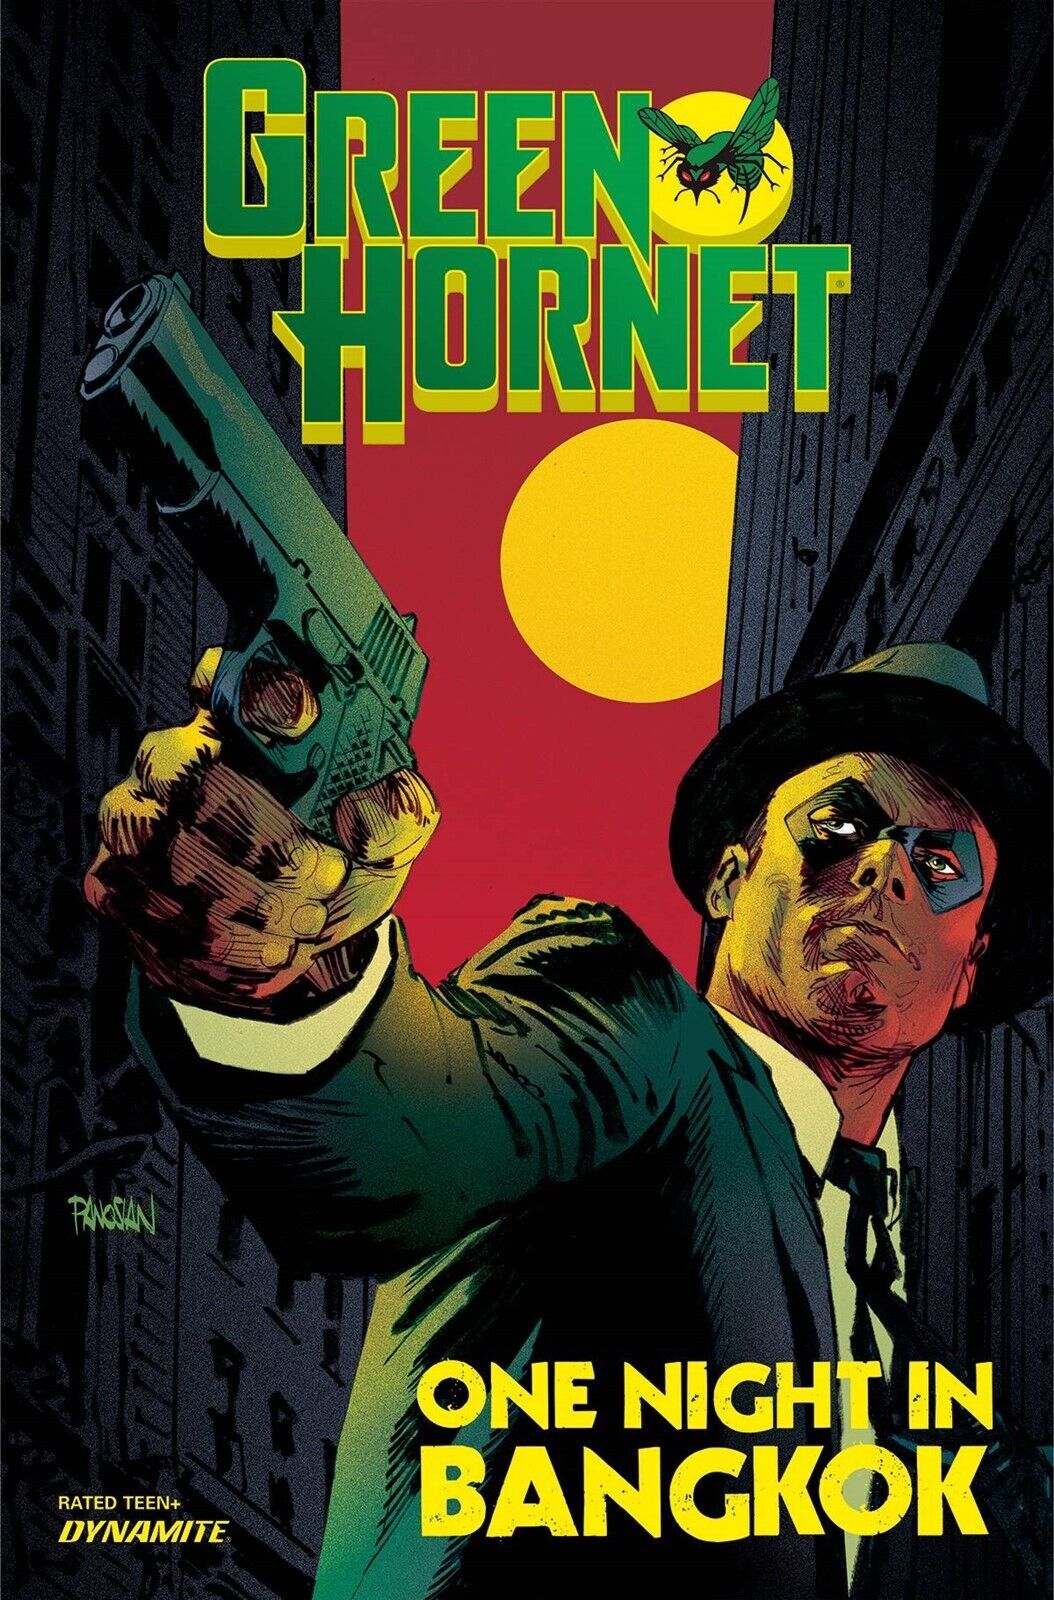 REVIEW: Dynamite Entertainment's Green Hornet: One Night in Bangkok #1